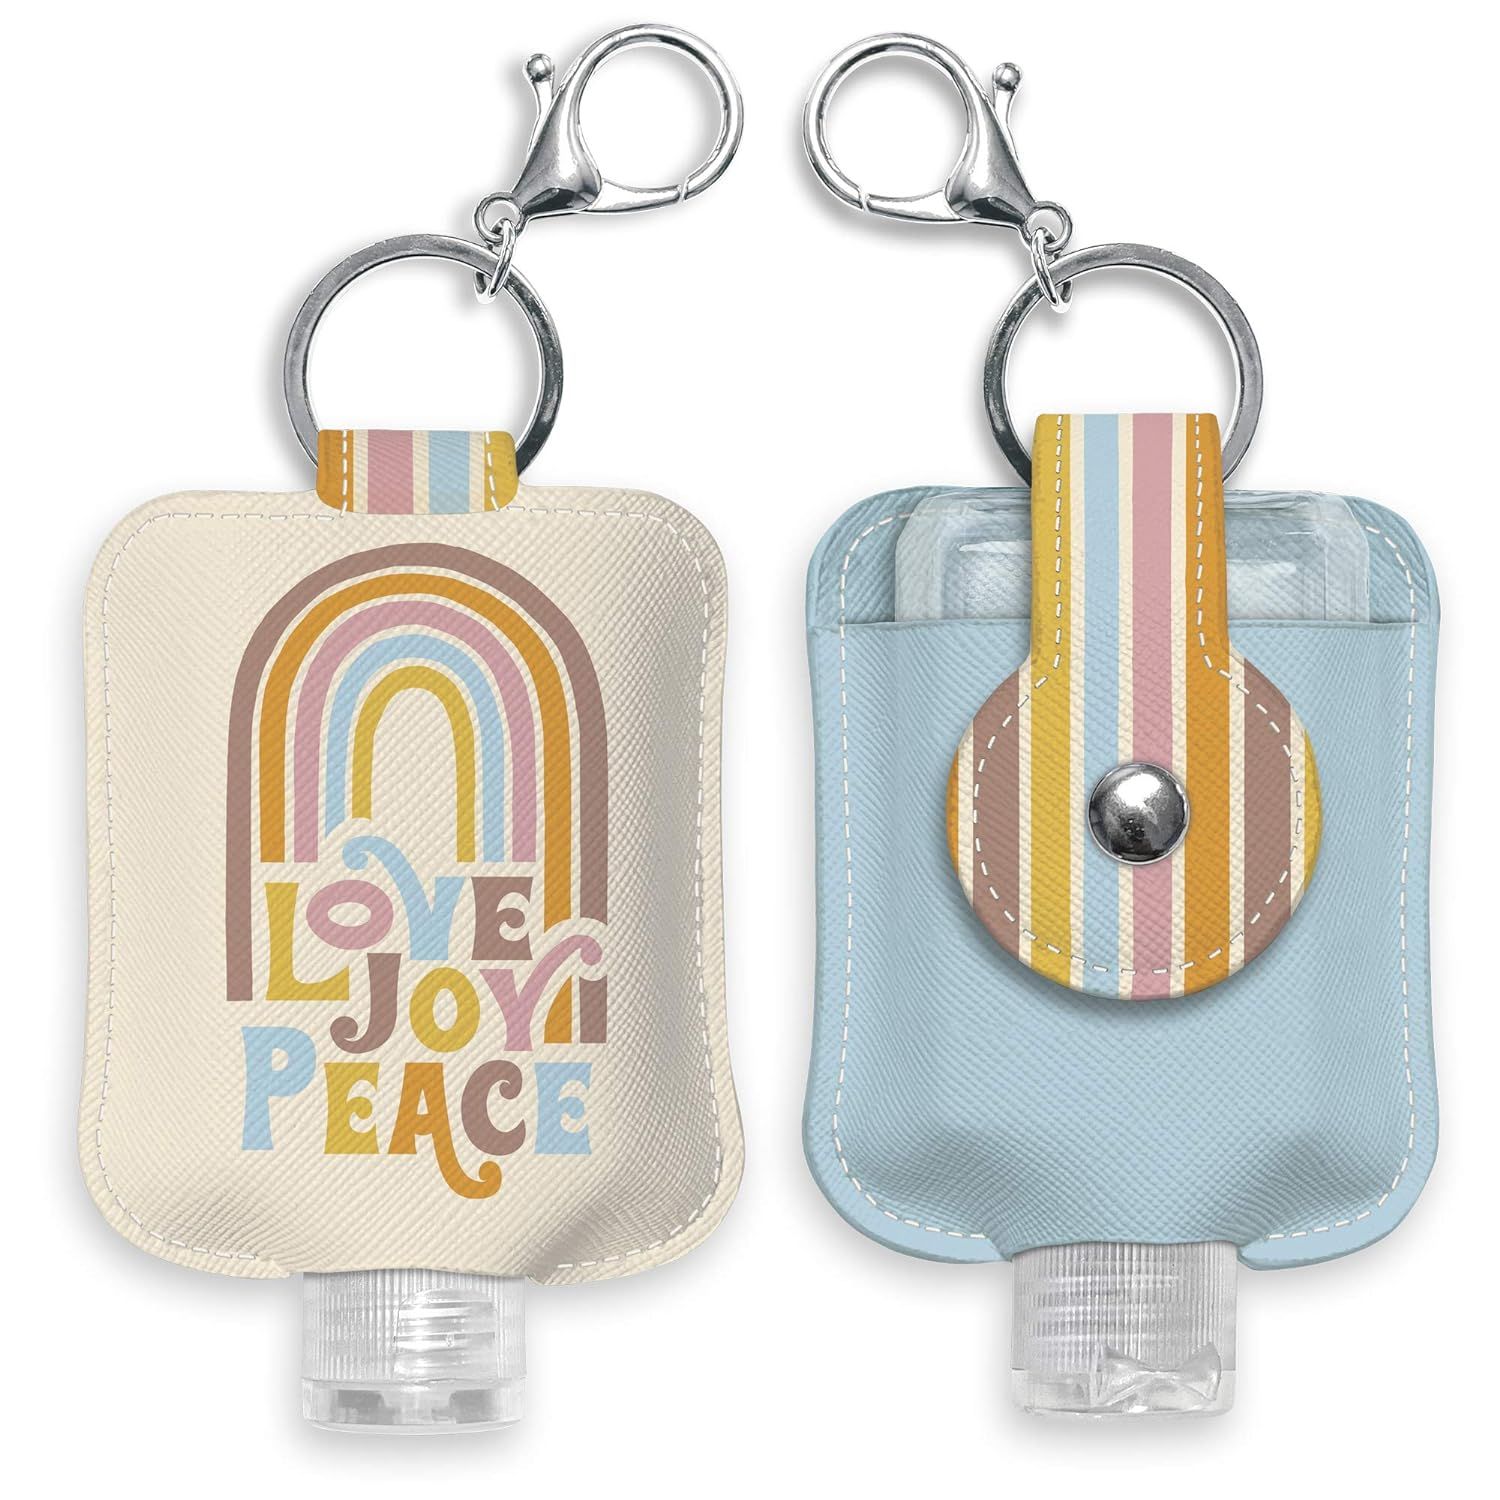 Hand Sanitizer Holder with Travel Bottle by Studio Oh! - Refillable Mini Bottle in Love Joy Peace... | Amazon (US)